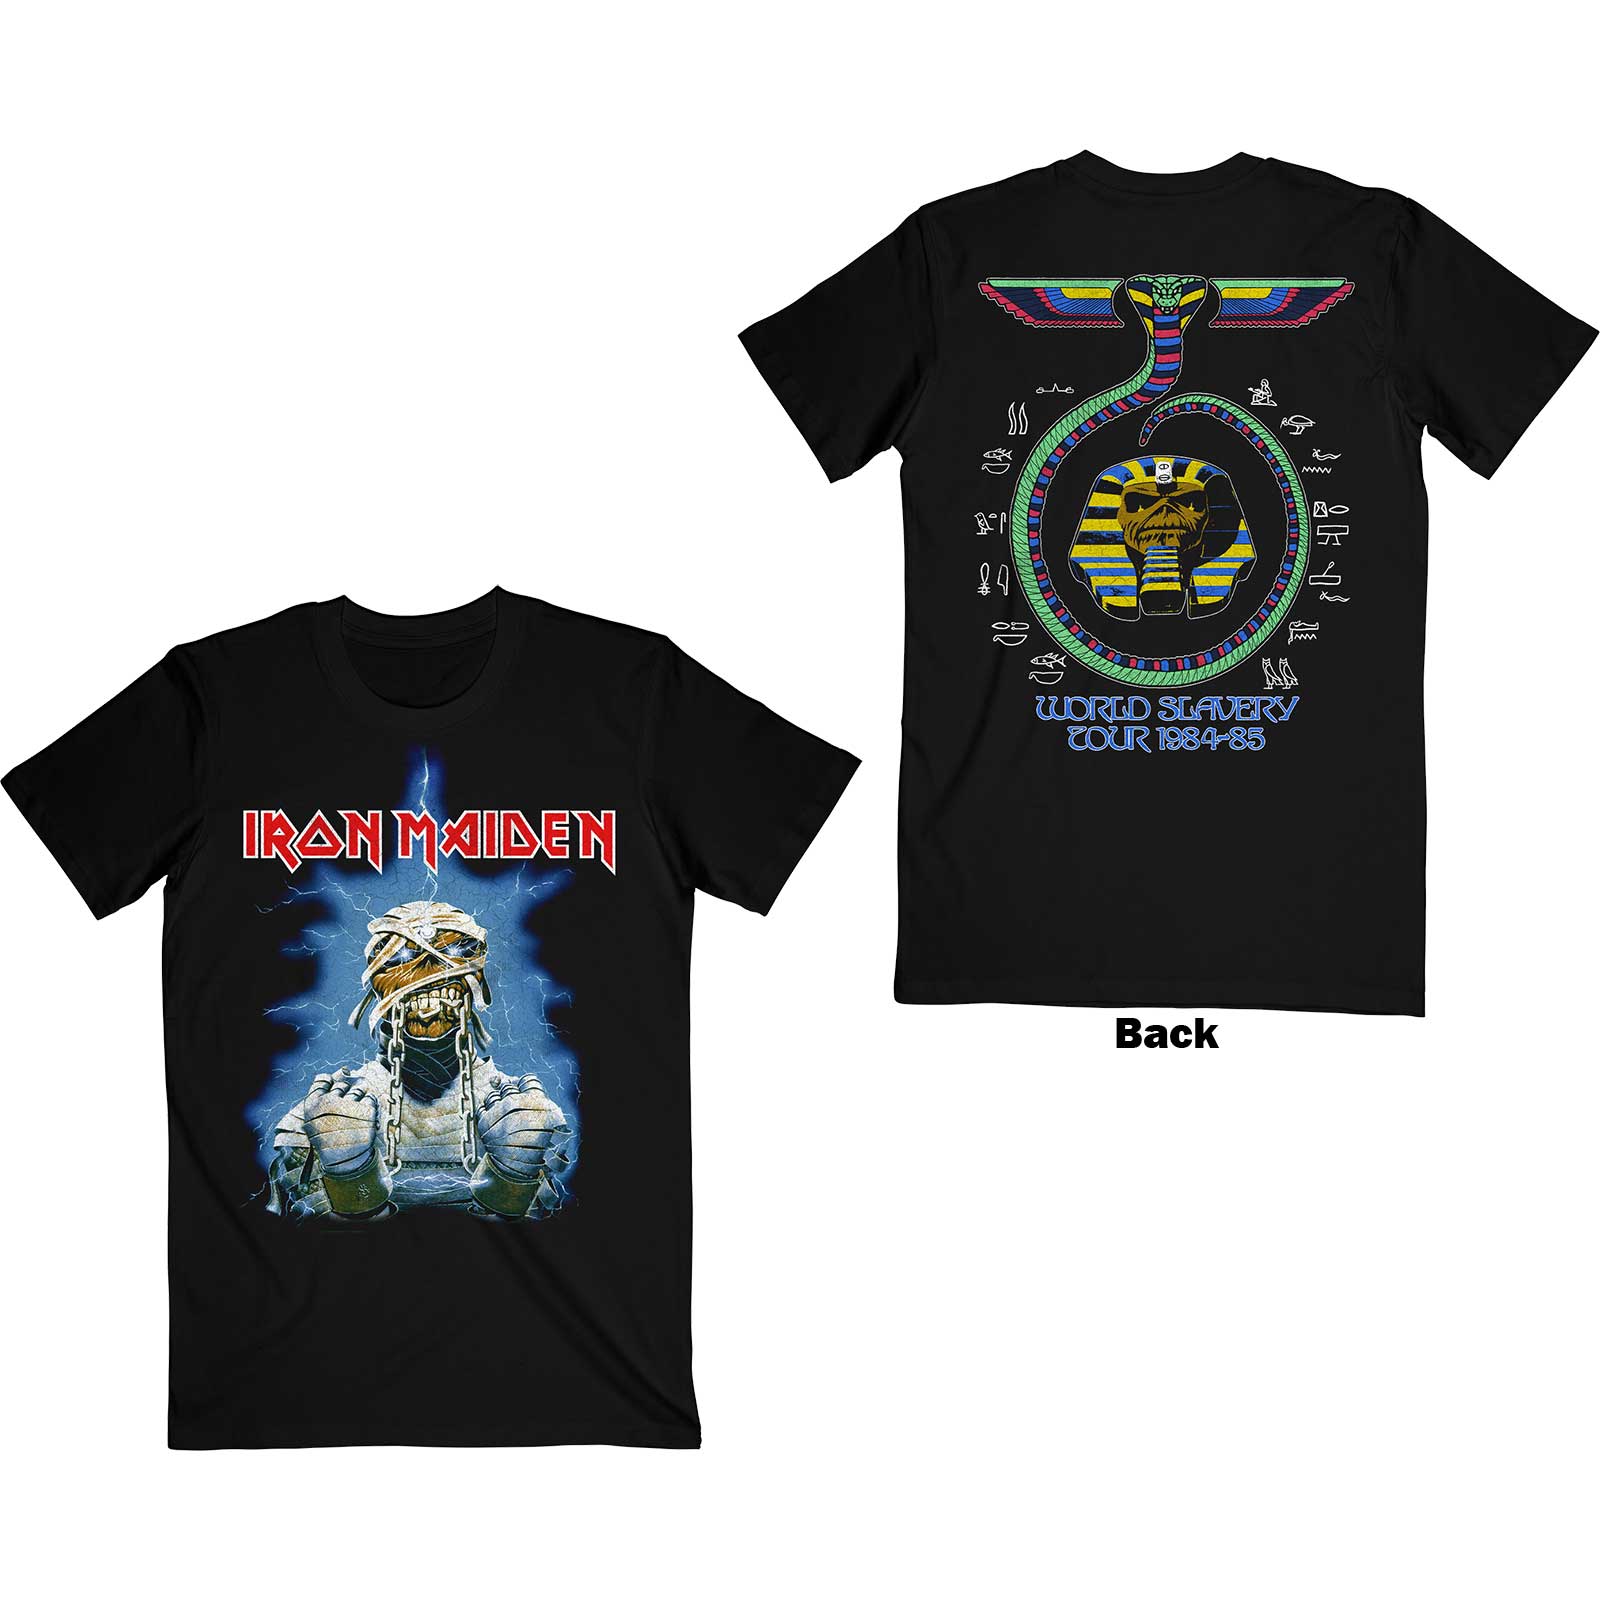 Iron Maiden T-Shirt - World Slavery Tour 1984-85 With Back Print (Unisex) - Front and Back